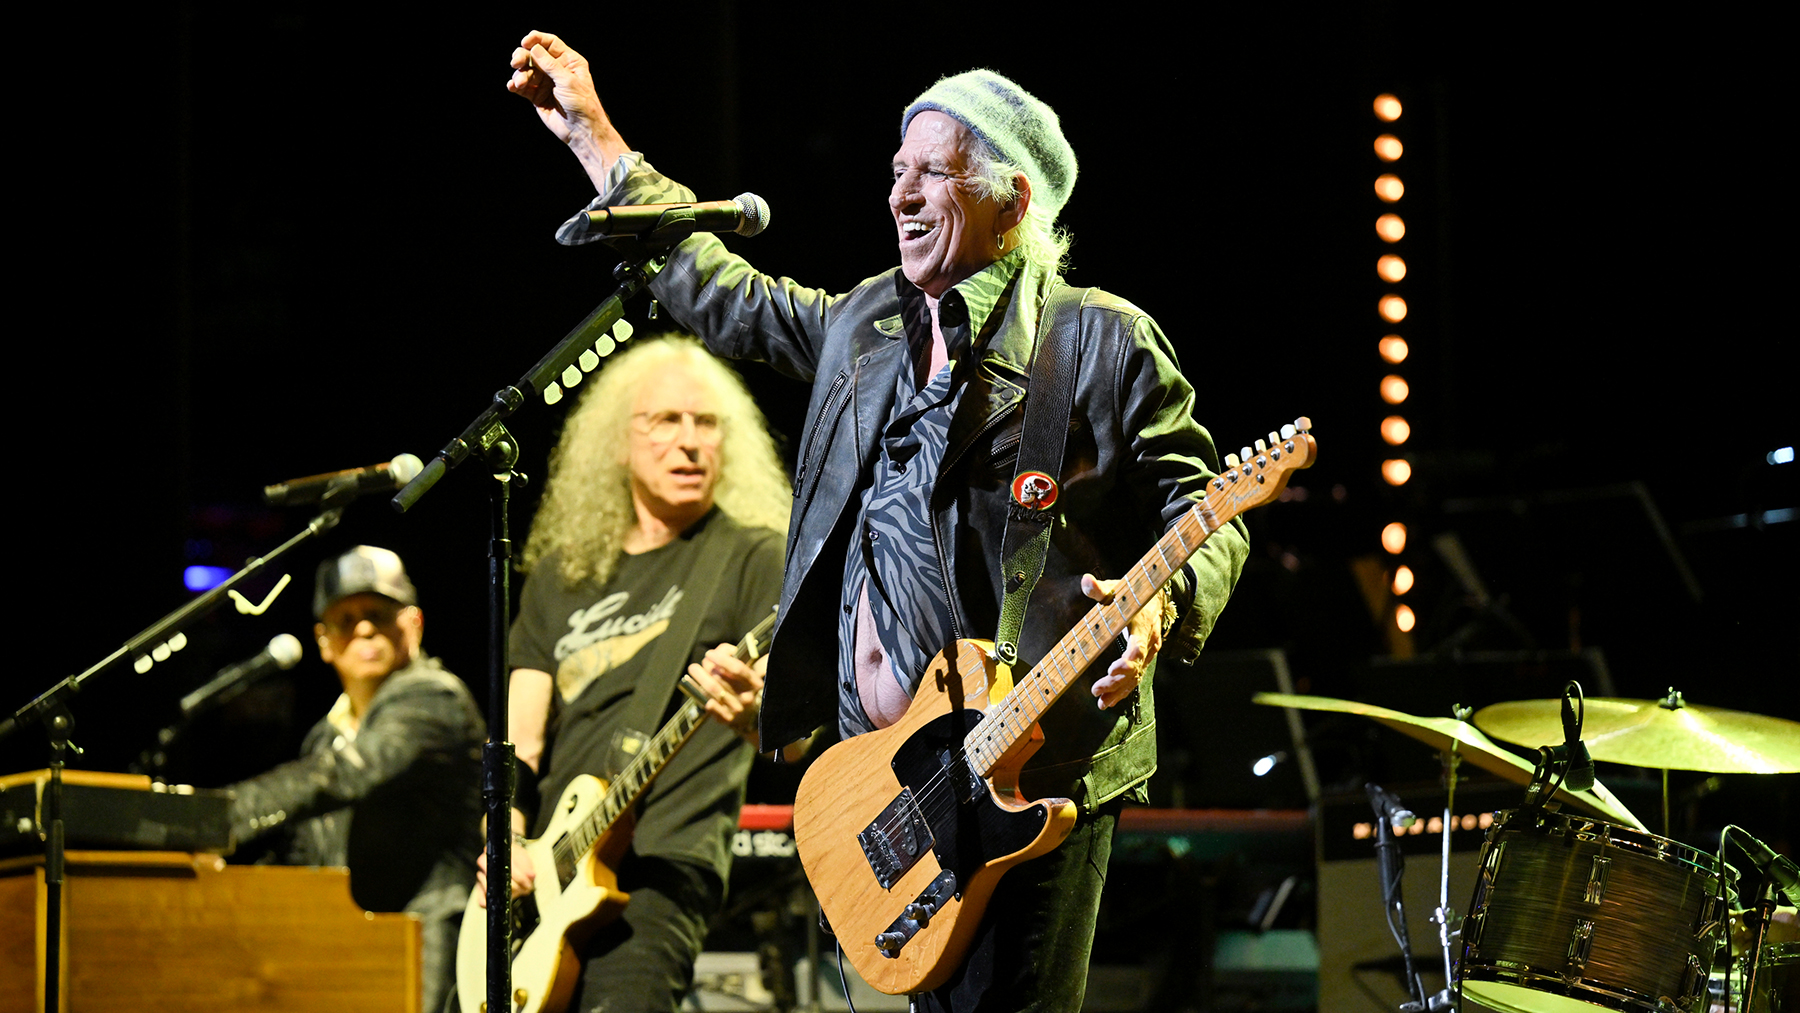 Check out Keith Richards’ reunion with X-Pansive Venus at New York Benefit